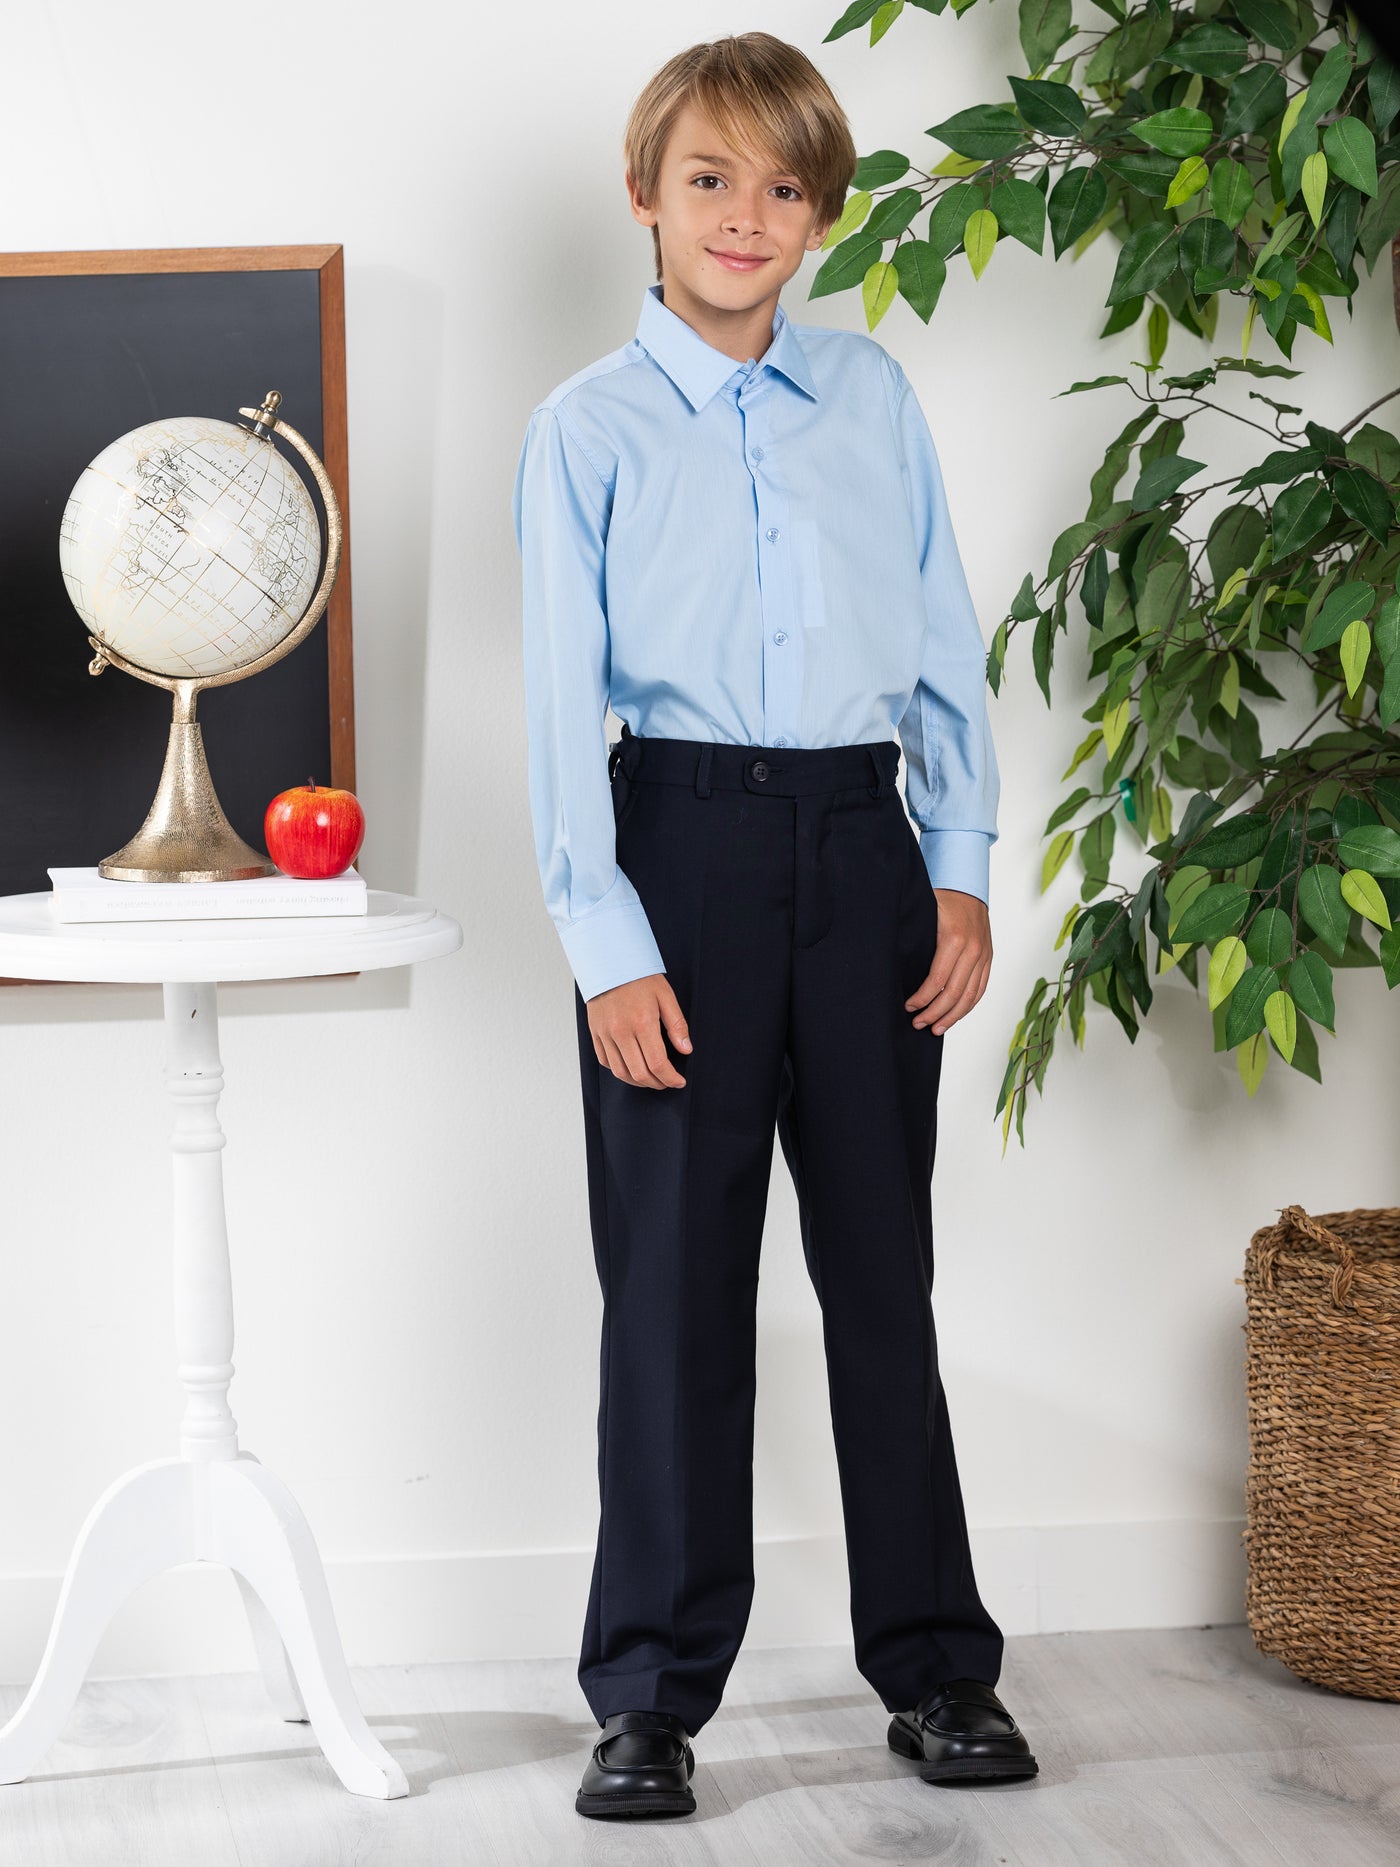 Essential Blue Button Down Shirt by Kids Couture